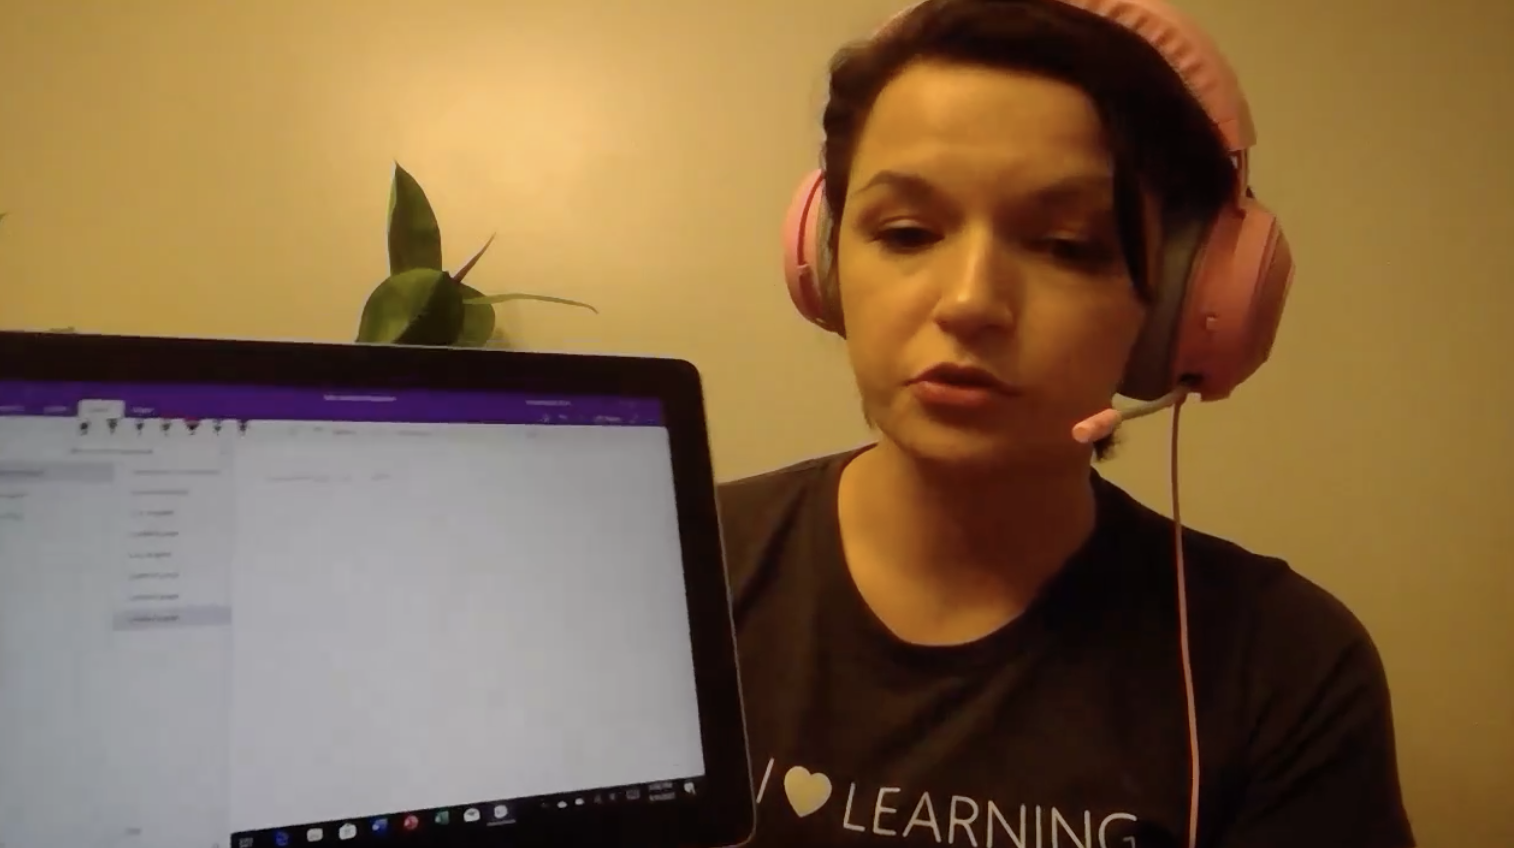 Student sitting in front of computer wearing headphones